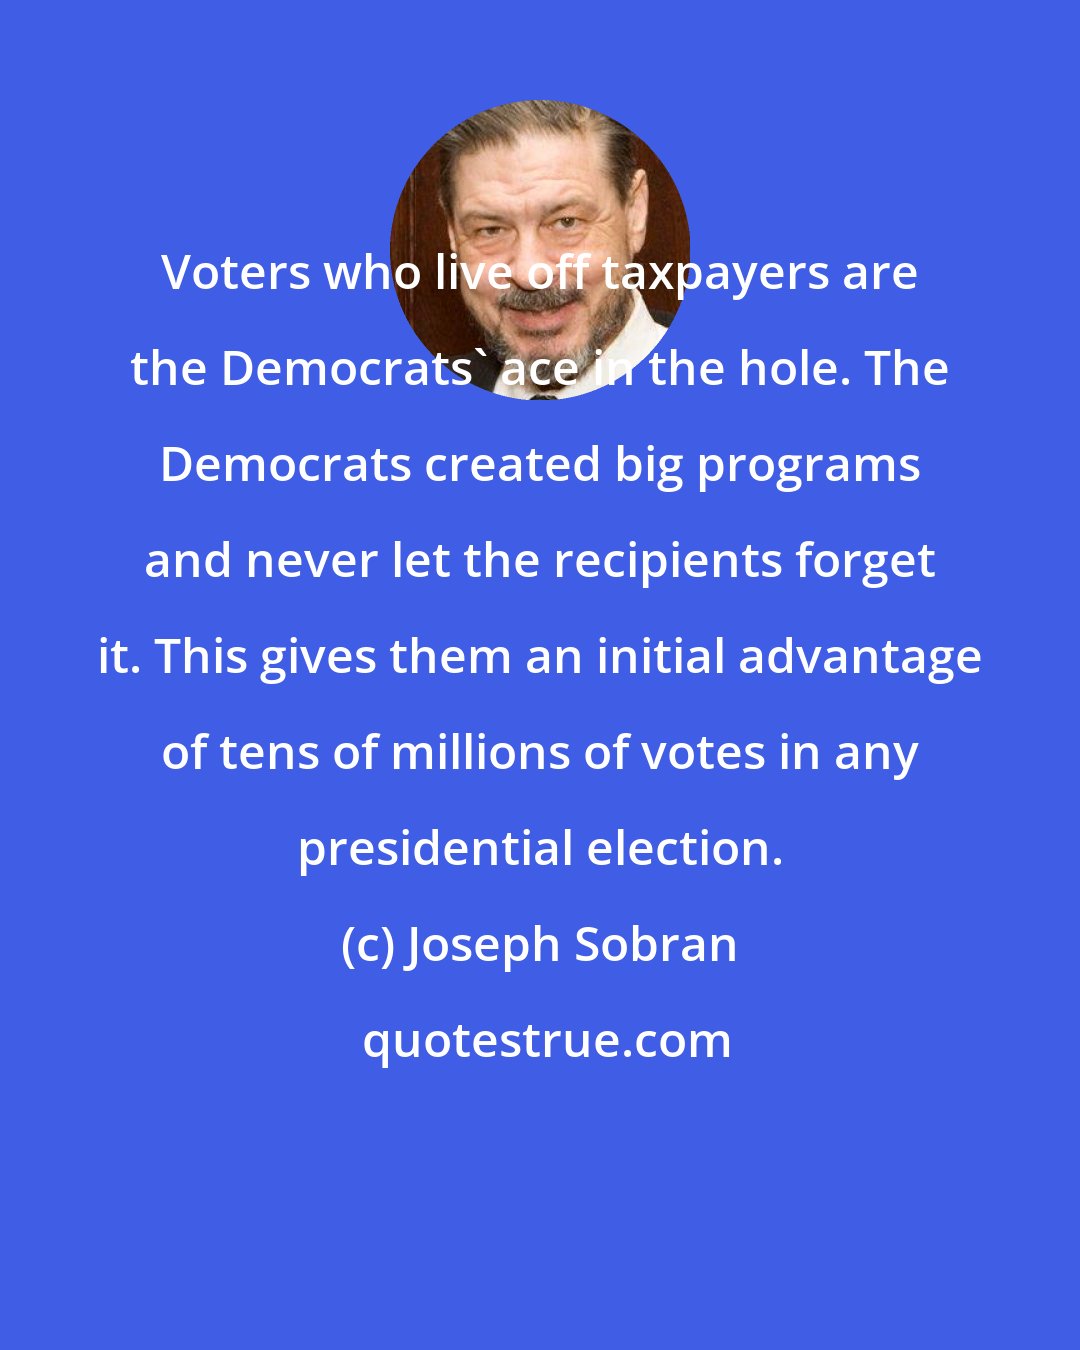 Joseph Sobran: Voters who live off taxpayers are the Democrats' ace in the hole. The Democrats created big programs and never let the recipients forget it. This gives them an initial advantage of tens of millions of votes in any presidential election.